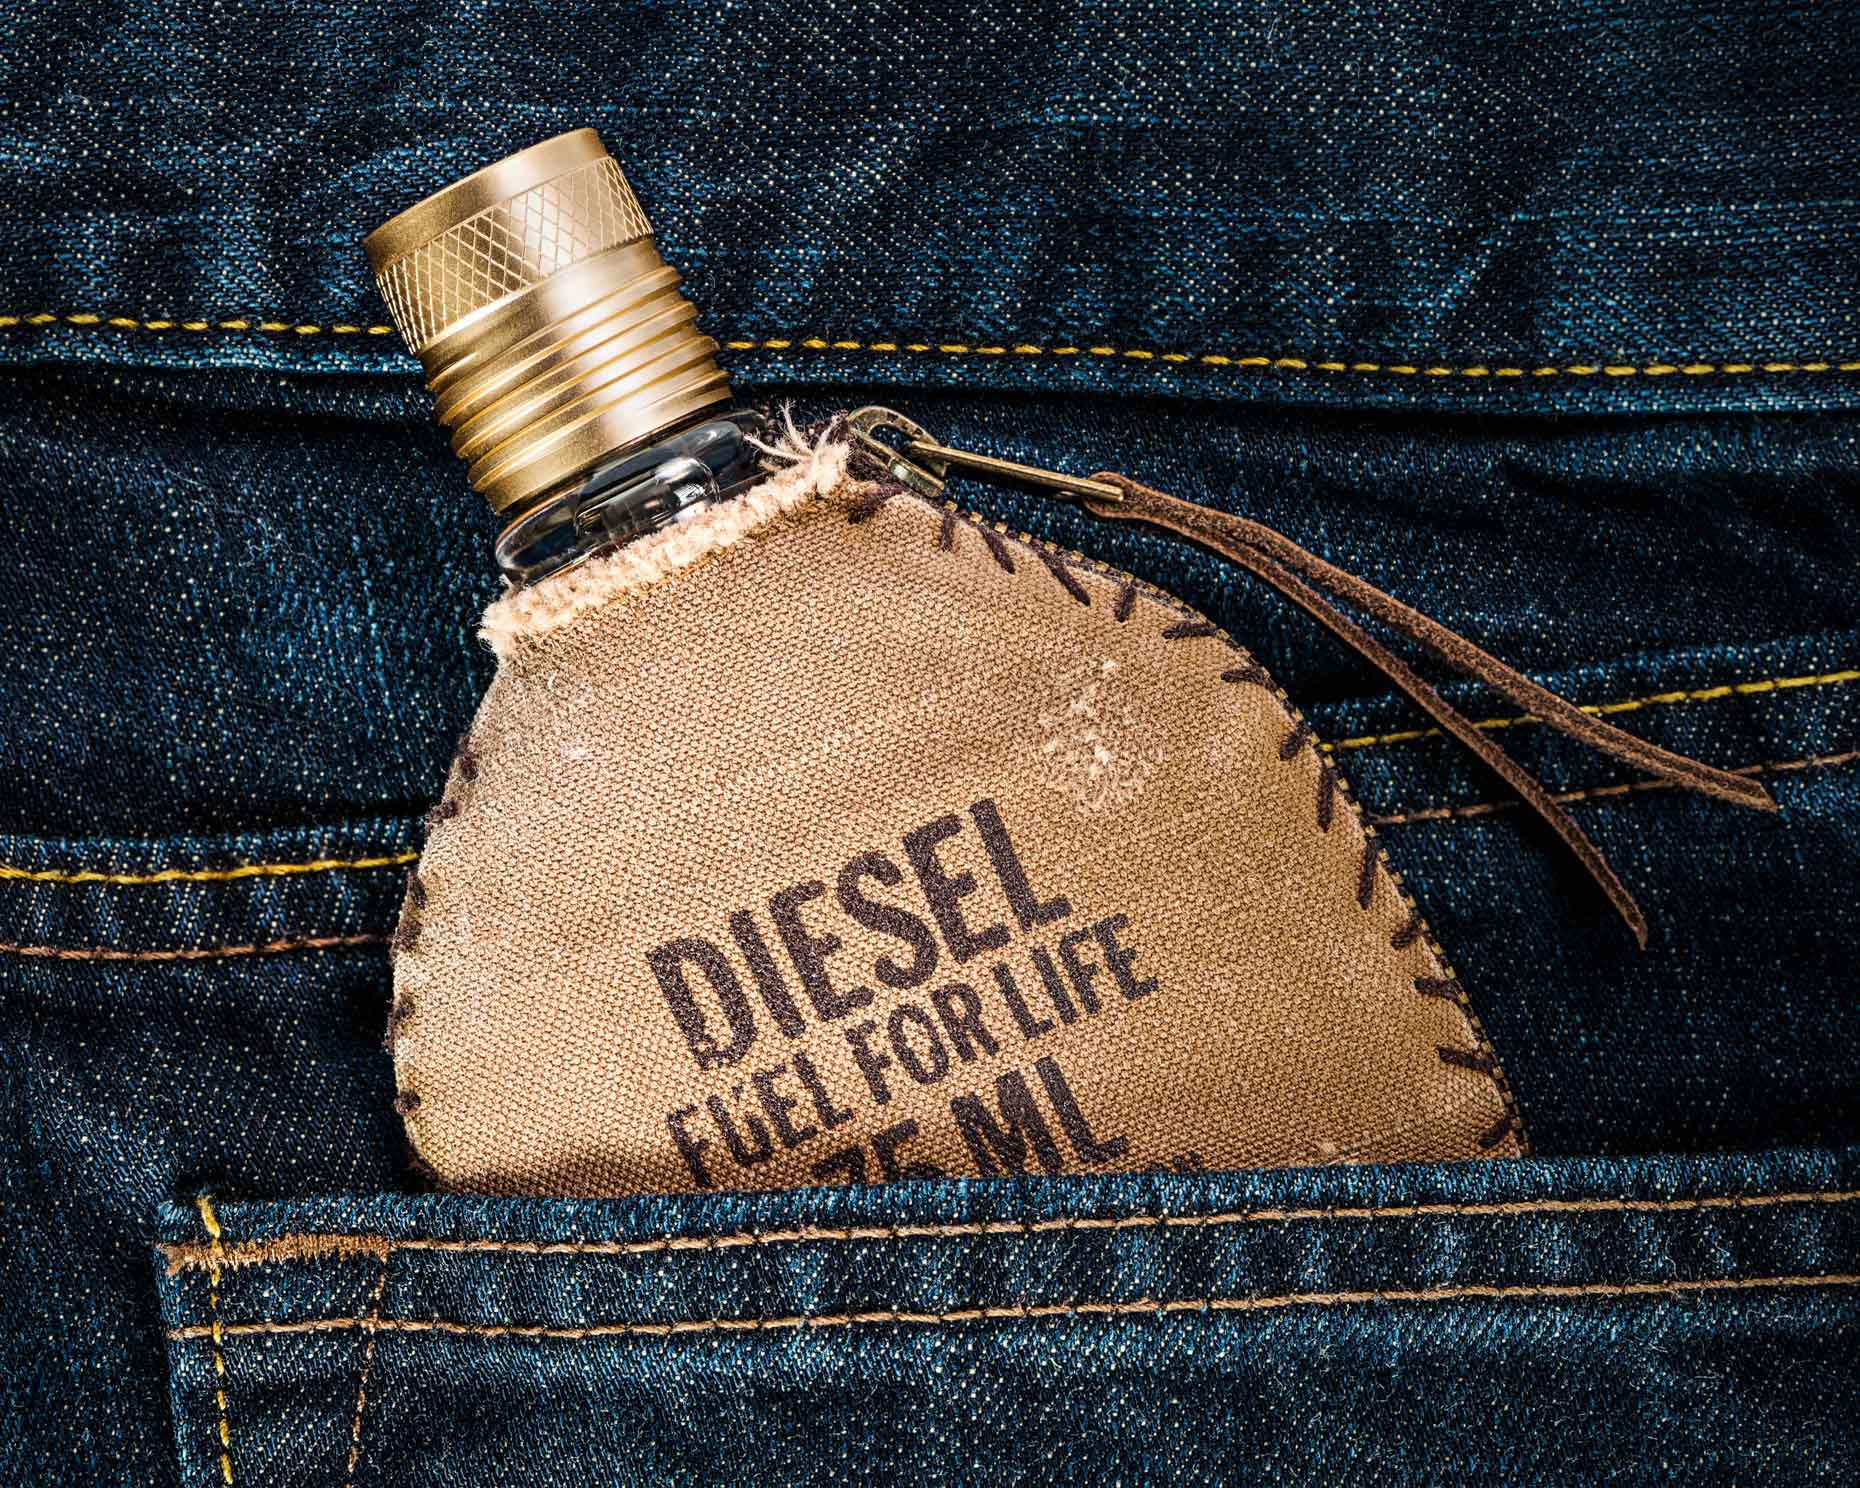 Fragrance Diesel Fuel for Life - Christophe Benard Photography - Edmonton Commercial Photographer, Edmonton Commercial Photography, Edmonton Product Photographer, Edmonton Product Photography, Still Life Photographer in Canada, Product Photographer in Canada